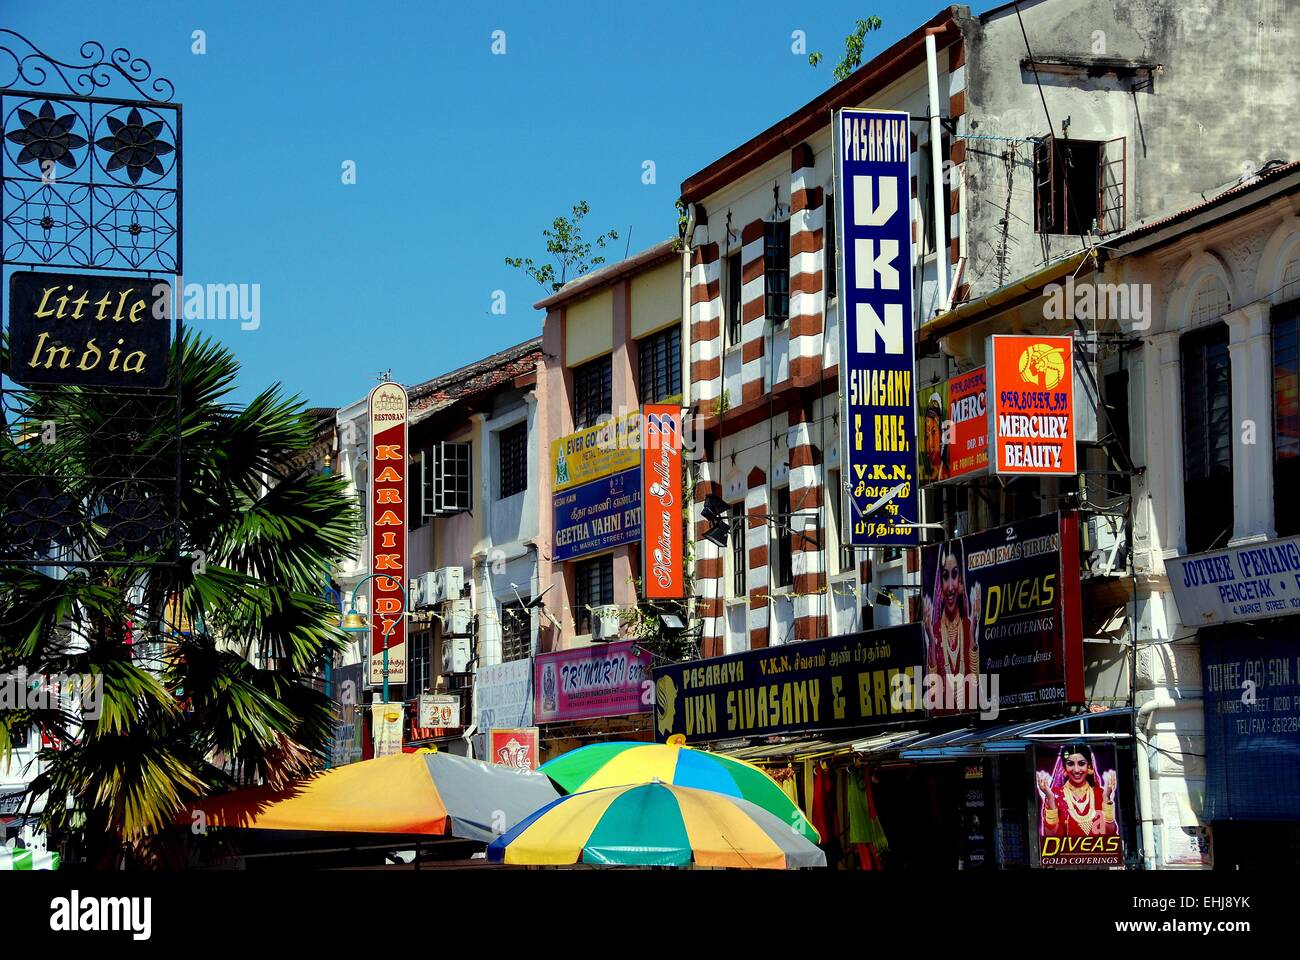 Georgetown, Malaysia: Storefronts in Little India on Lebuh Pasar with their colourful buildings and signs Stock Photo